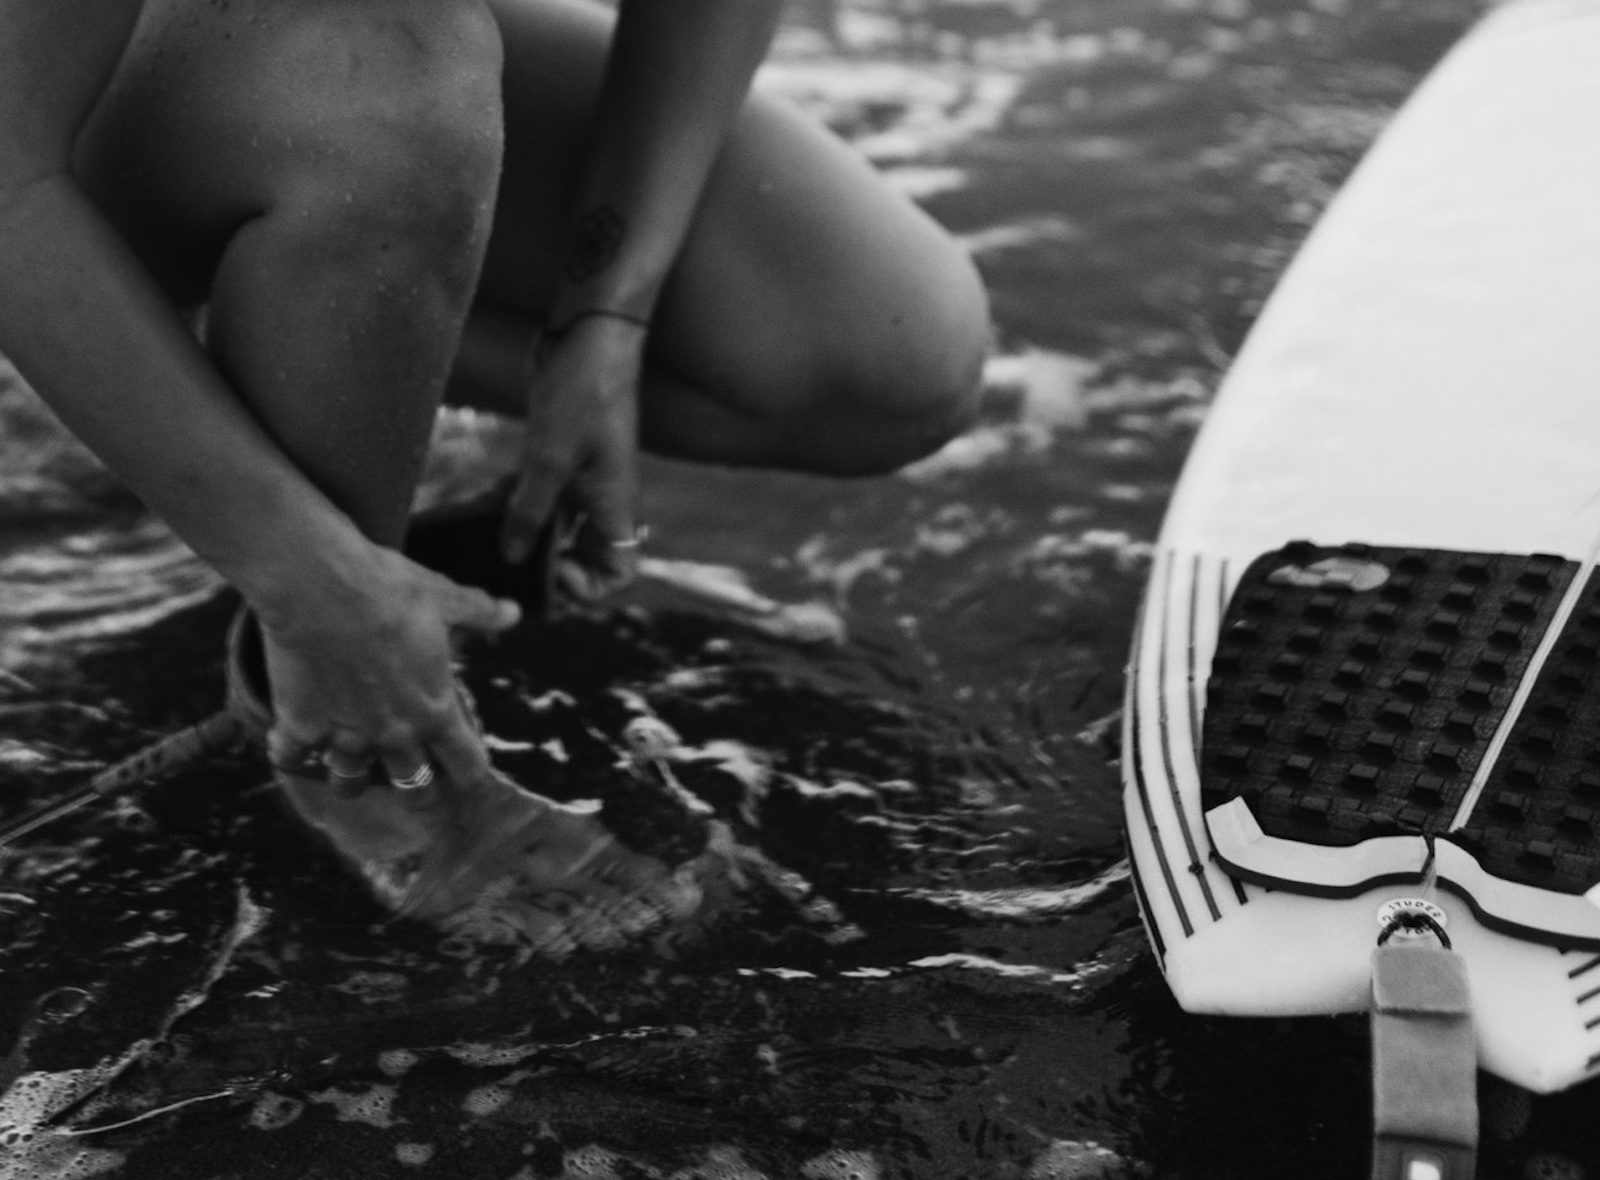 How to choose your surfing traction pad - Blog